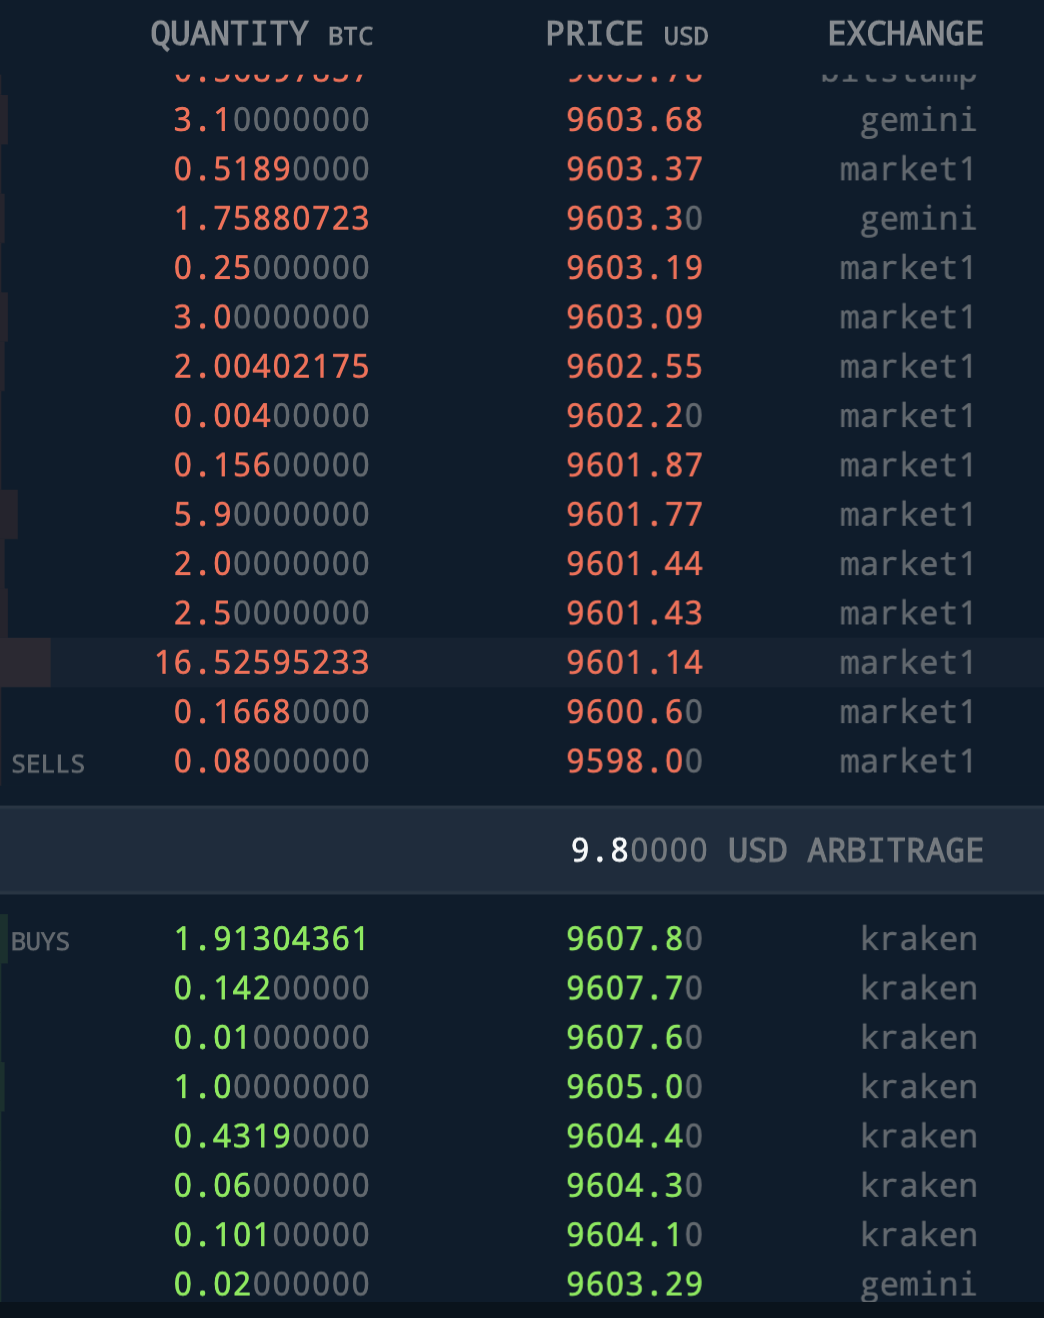 SFOX's order book loudly displays Bitcoin arbitrage opportunities and empowers traders to capture it using SFOX's smart-routing order types.